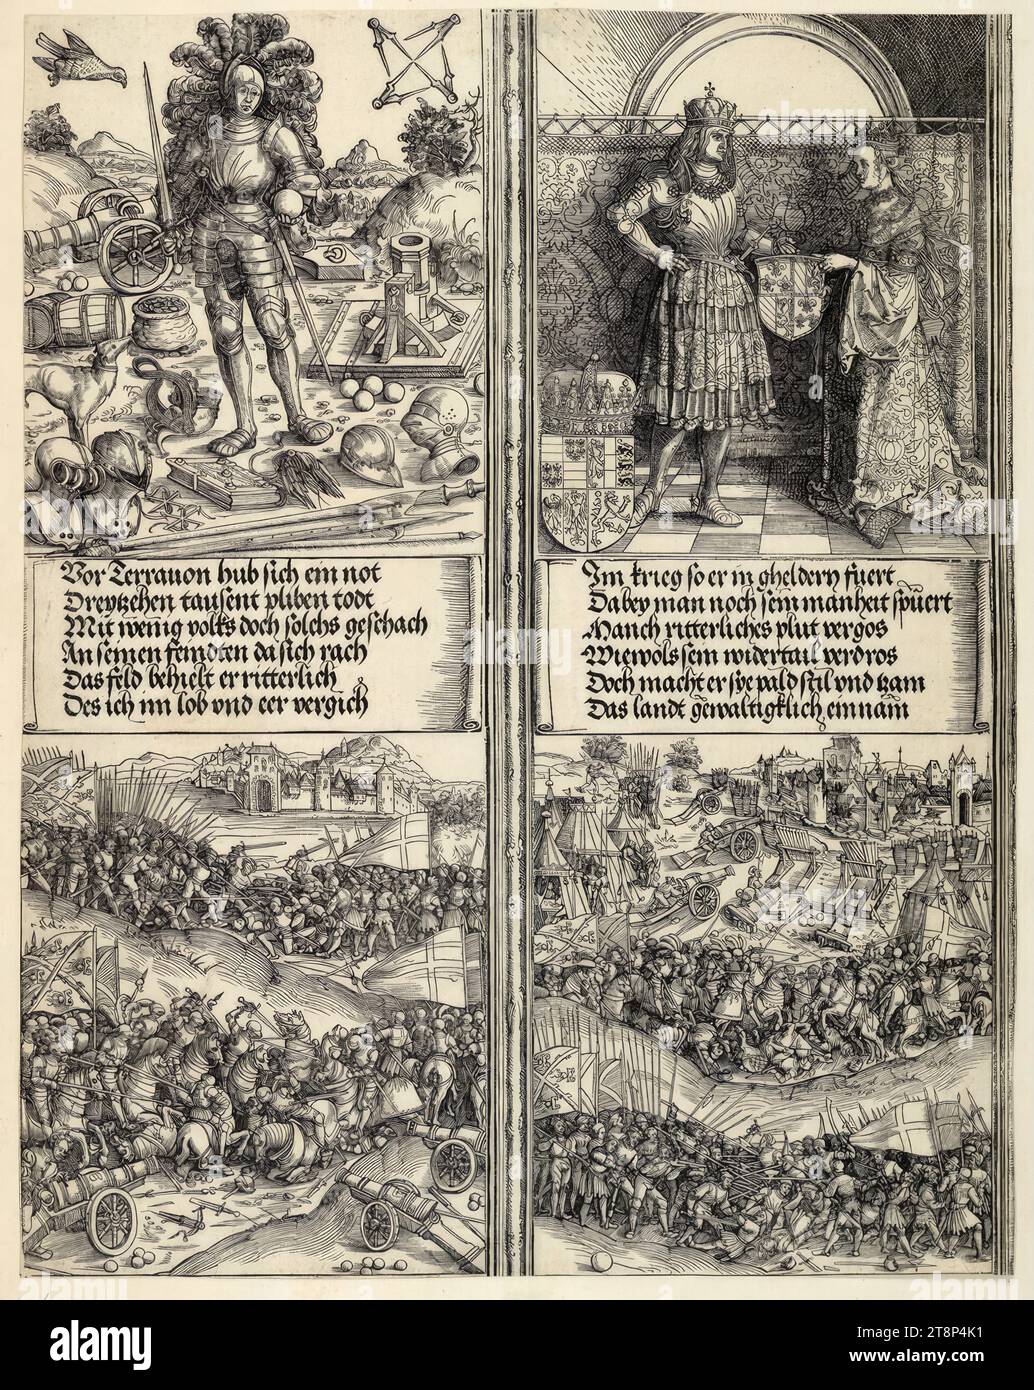 The youthful Maximilian, the marriage to Maria von Burgundy in 1477, the battle of Thérouanne/Guinegate in 1479, the first war over Geldern in 1481 (the gate of honor of Emperor Maximilian I, historical depictions, C 2.1, 2, 4, 5), the gate of honor of Emperor Maximilian I ., Hans Springinklee (Nuremberg 1490/95 - around 1540 Nuremberg), Wolf Traut (around 1490 - 1520, active in Nuremberg), 1515, print, woodcut Stock Photo